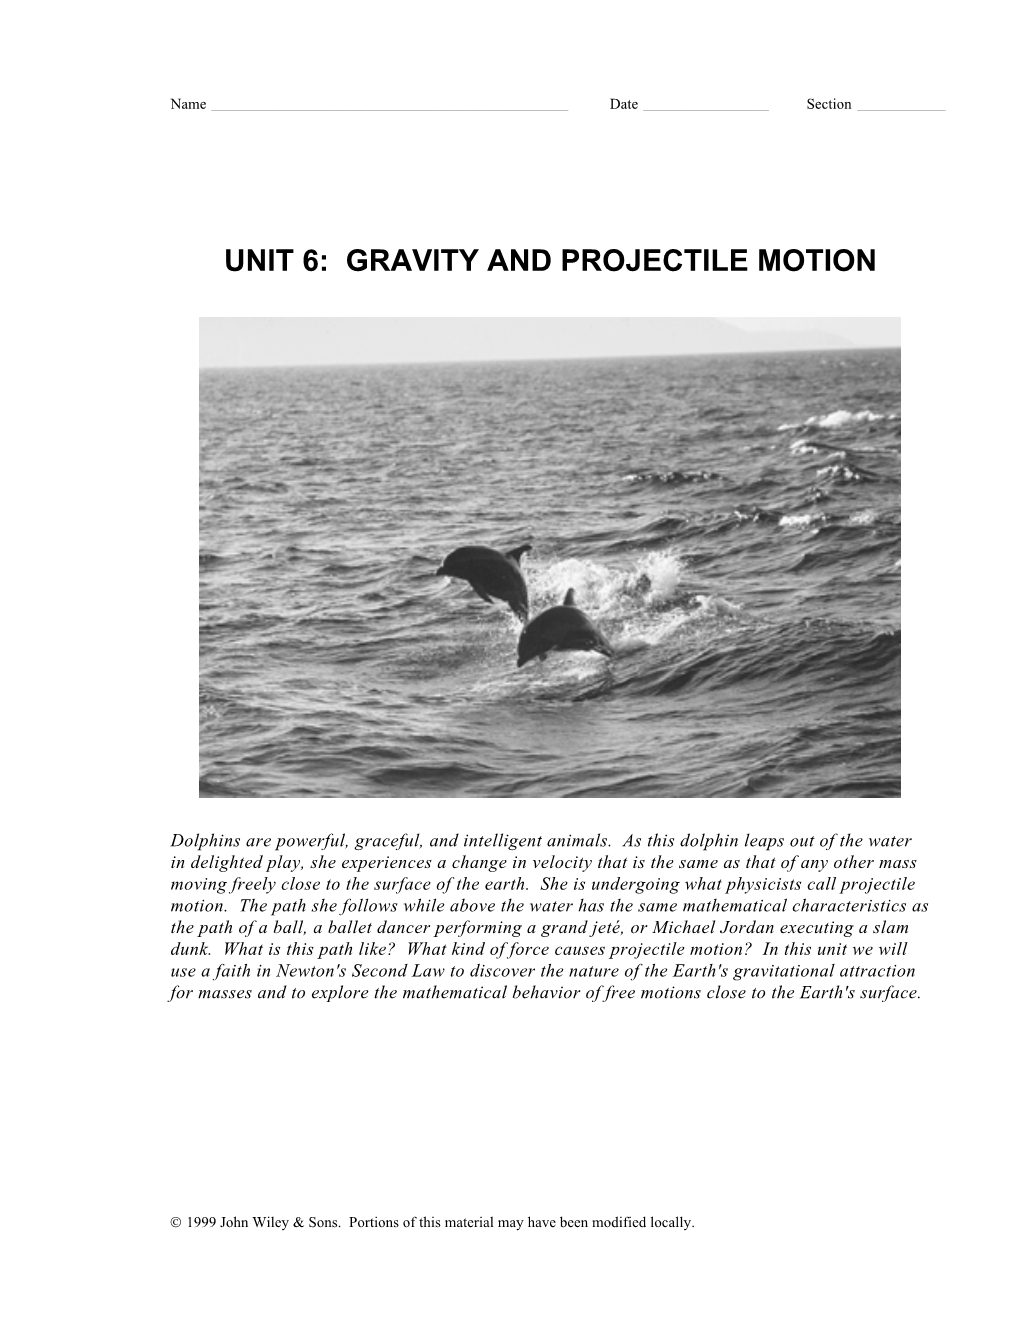 Unit 6: Gravity and Projectile Motion